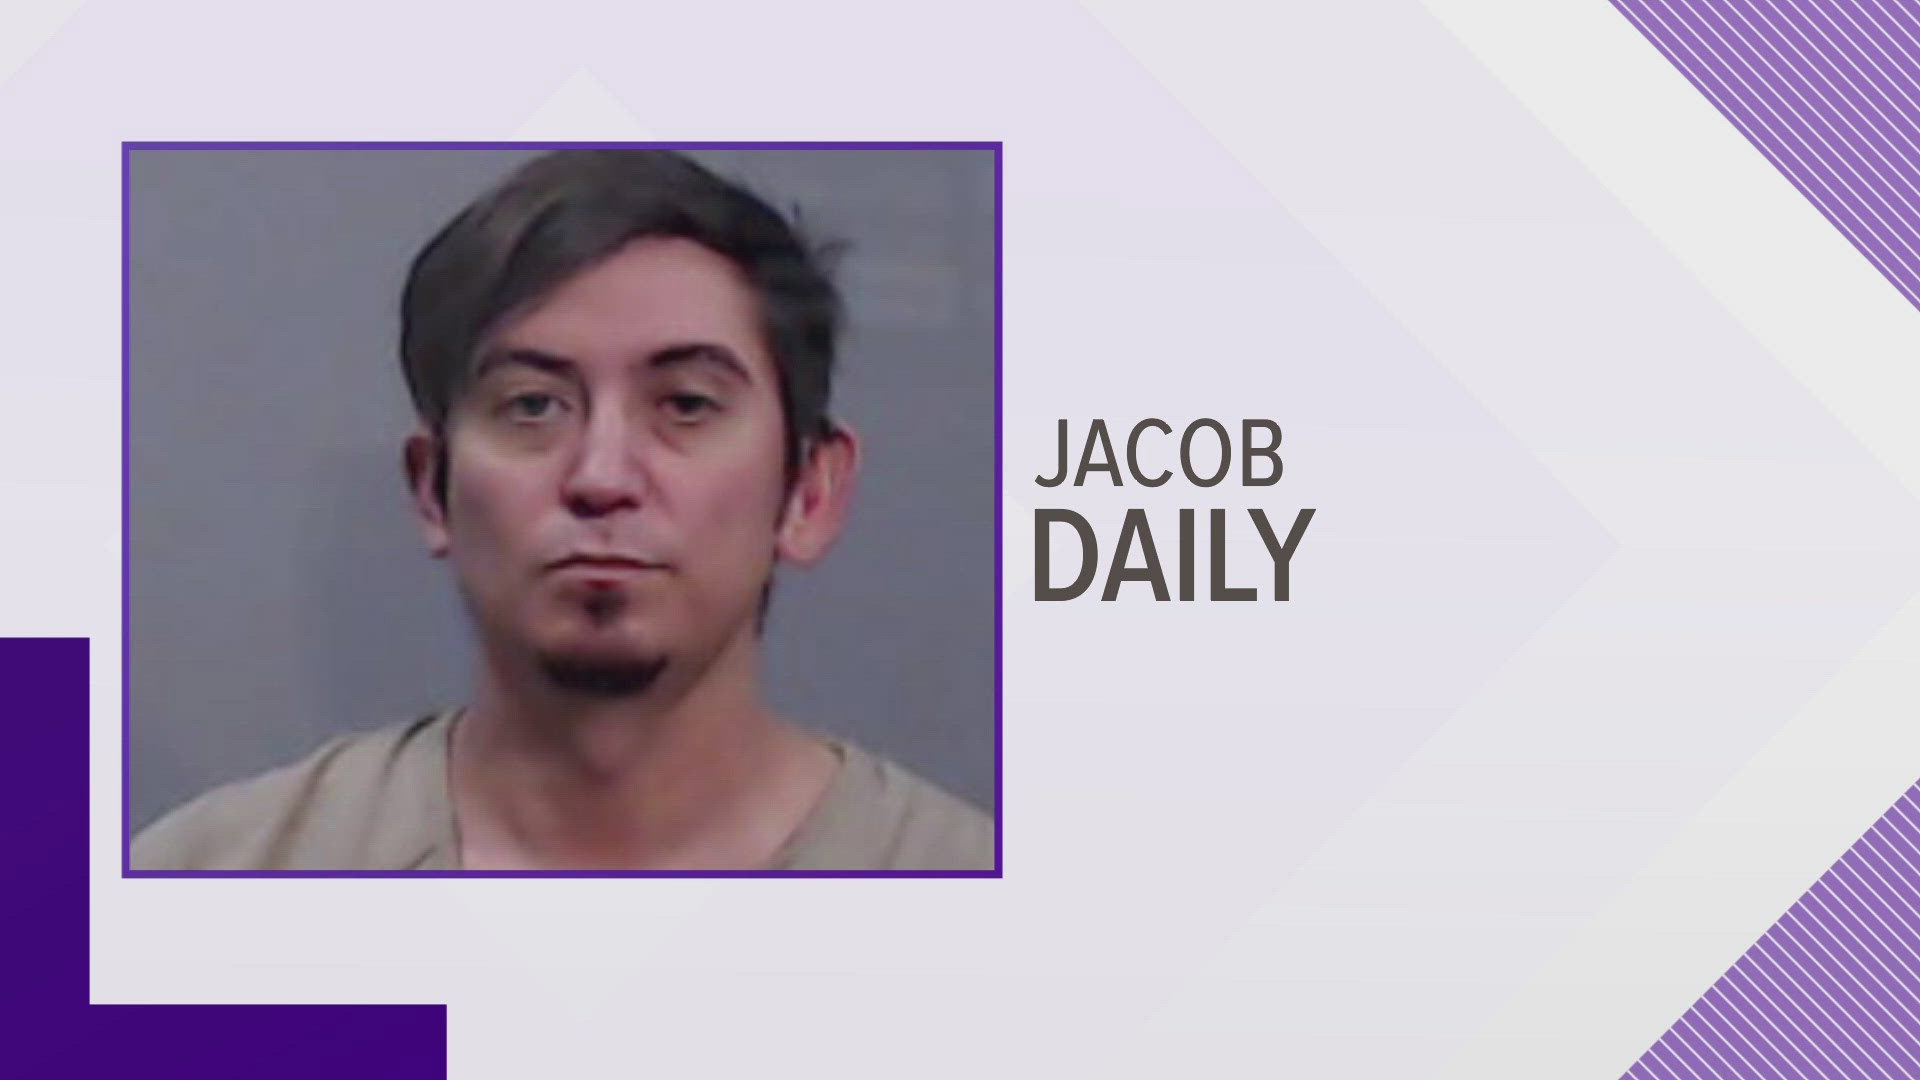 On May 18, 37-year-old Jacob Daily was reportedly highly intoxicated when being interviewed by Odessa PD, telling officers that Adam Beltran committed suicide.